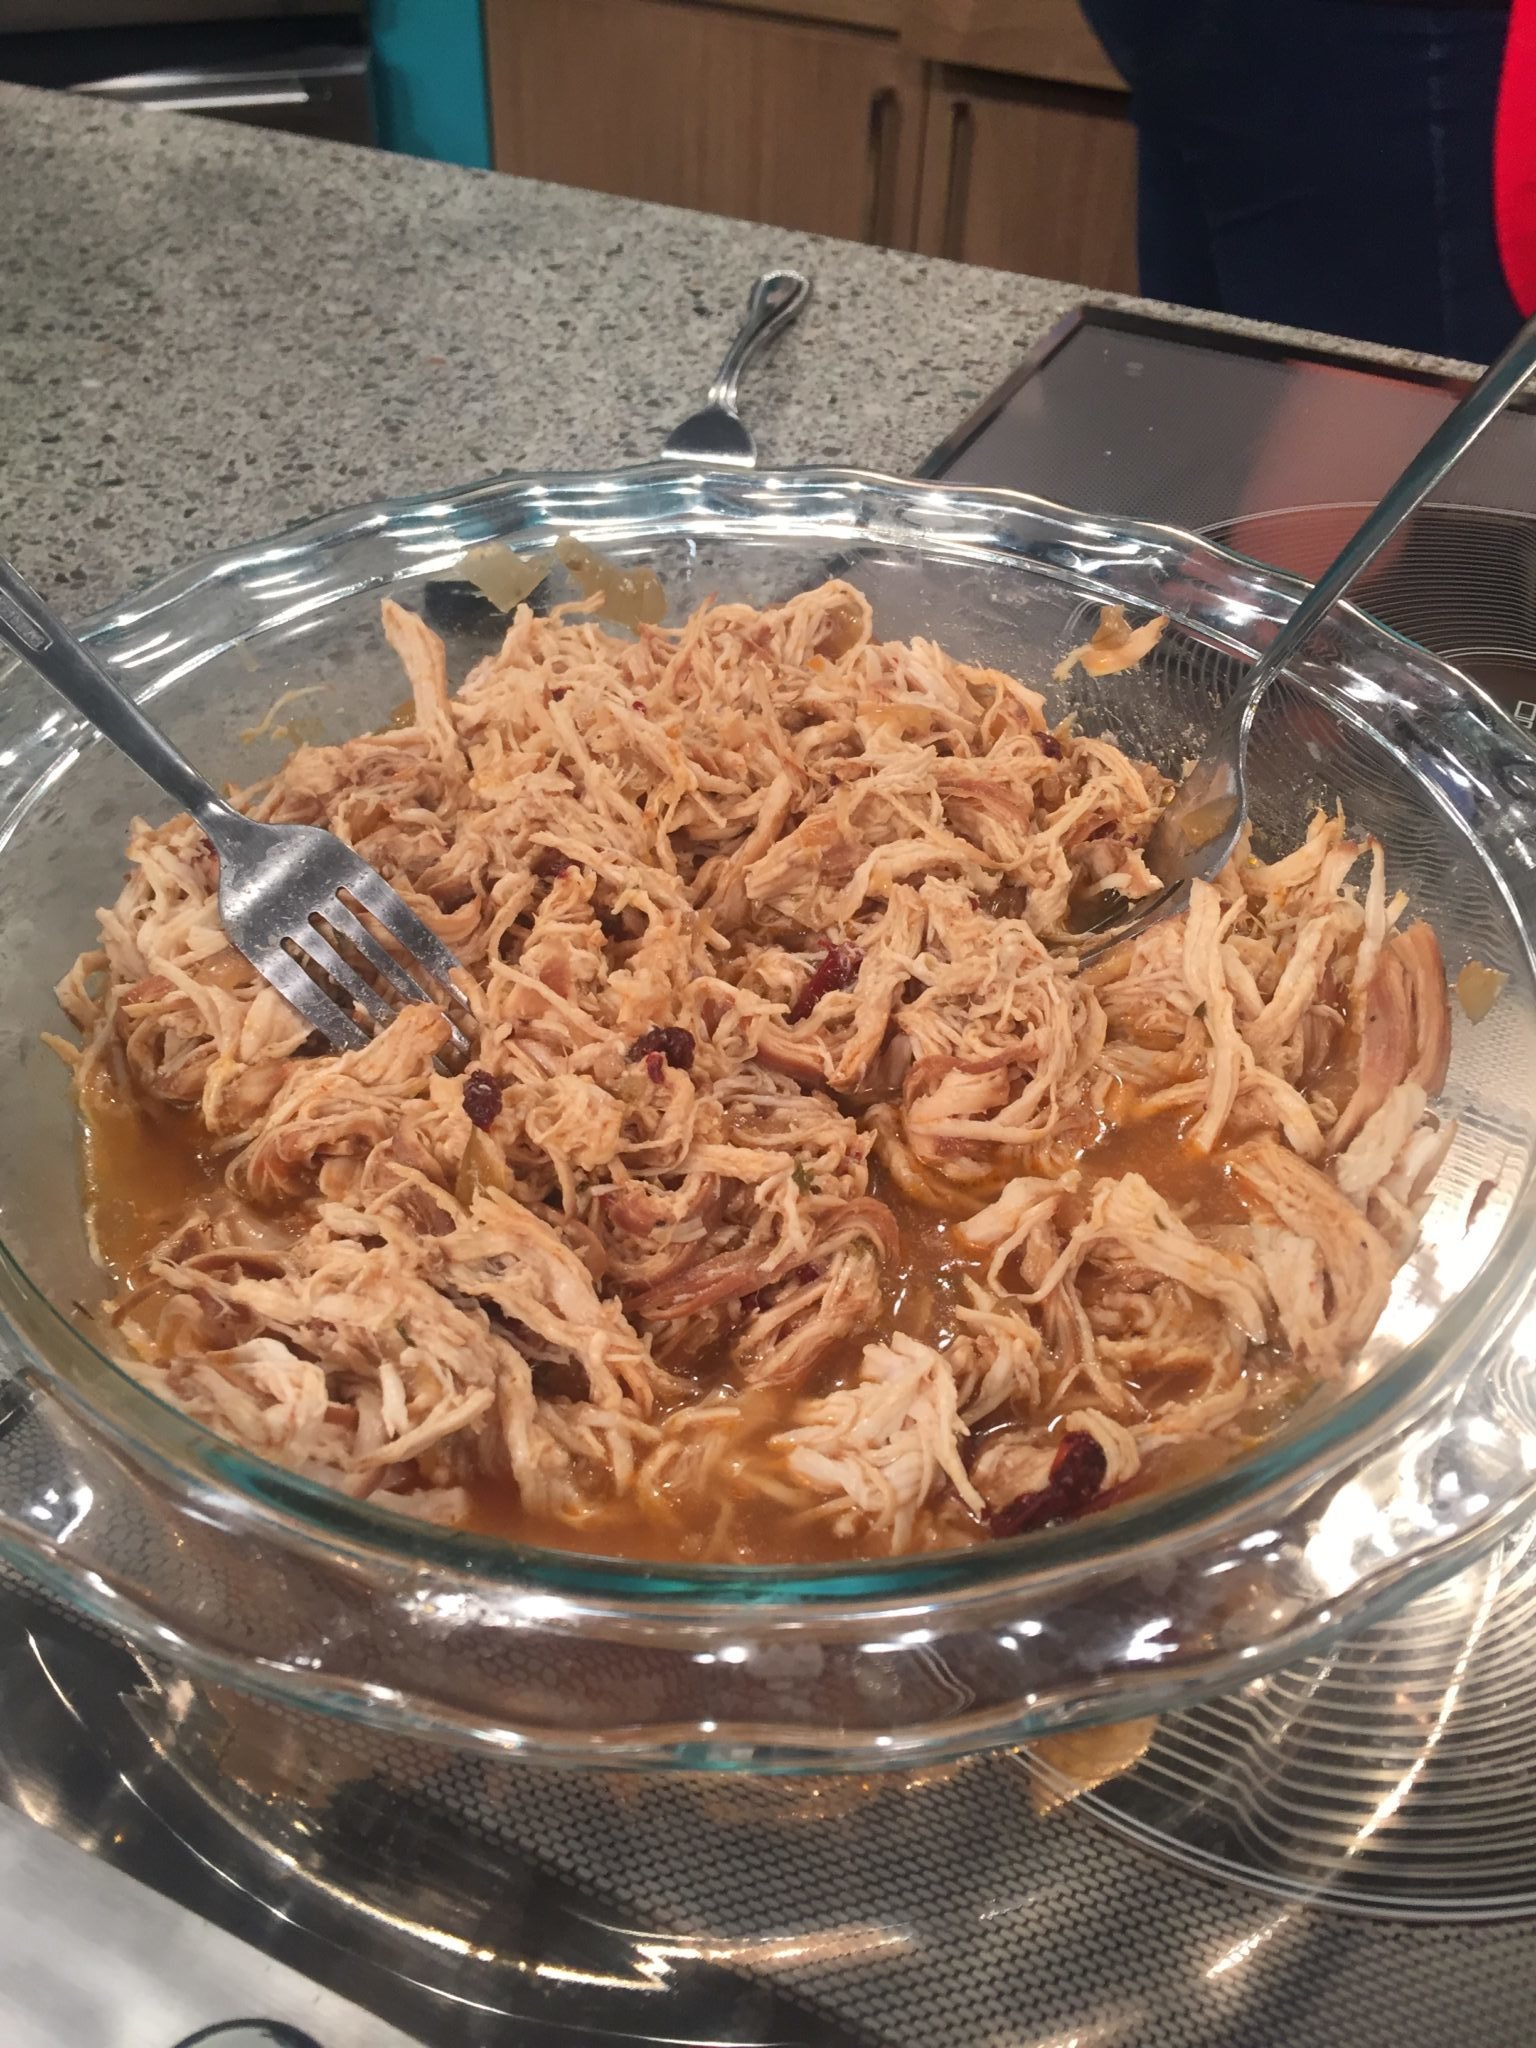 Shredded chicken for Crockpot Chipotle Chicken Tacos for Quick and Easy Dinners for Busy Summer Nights